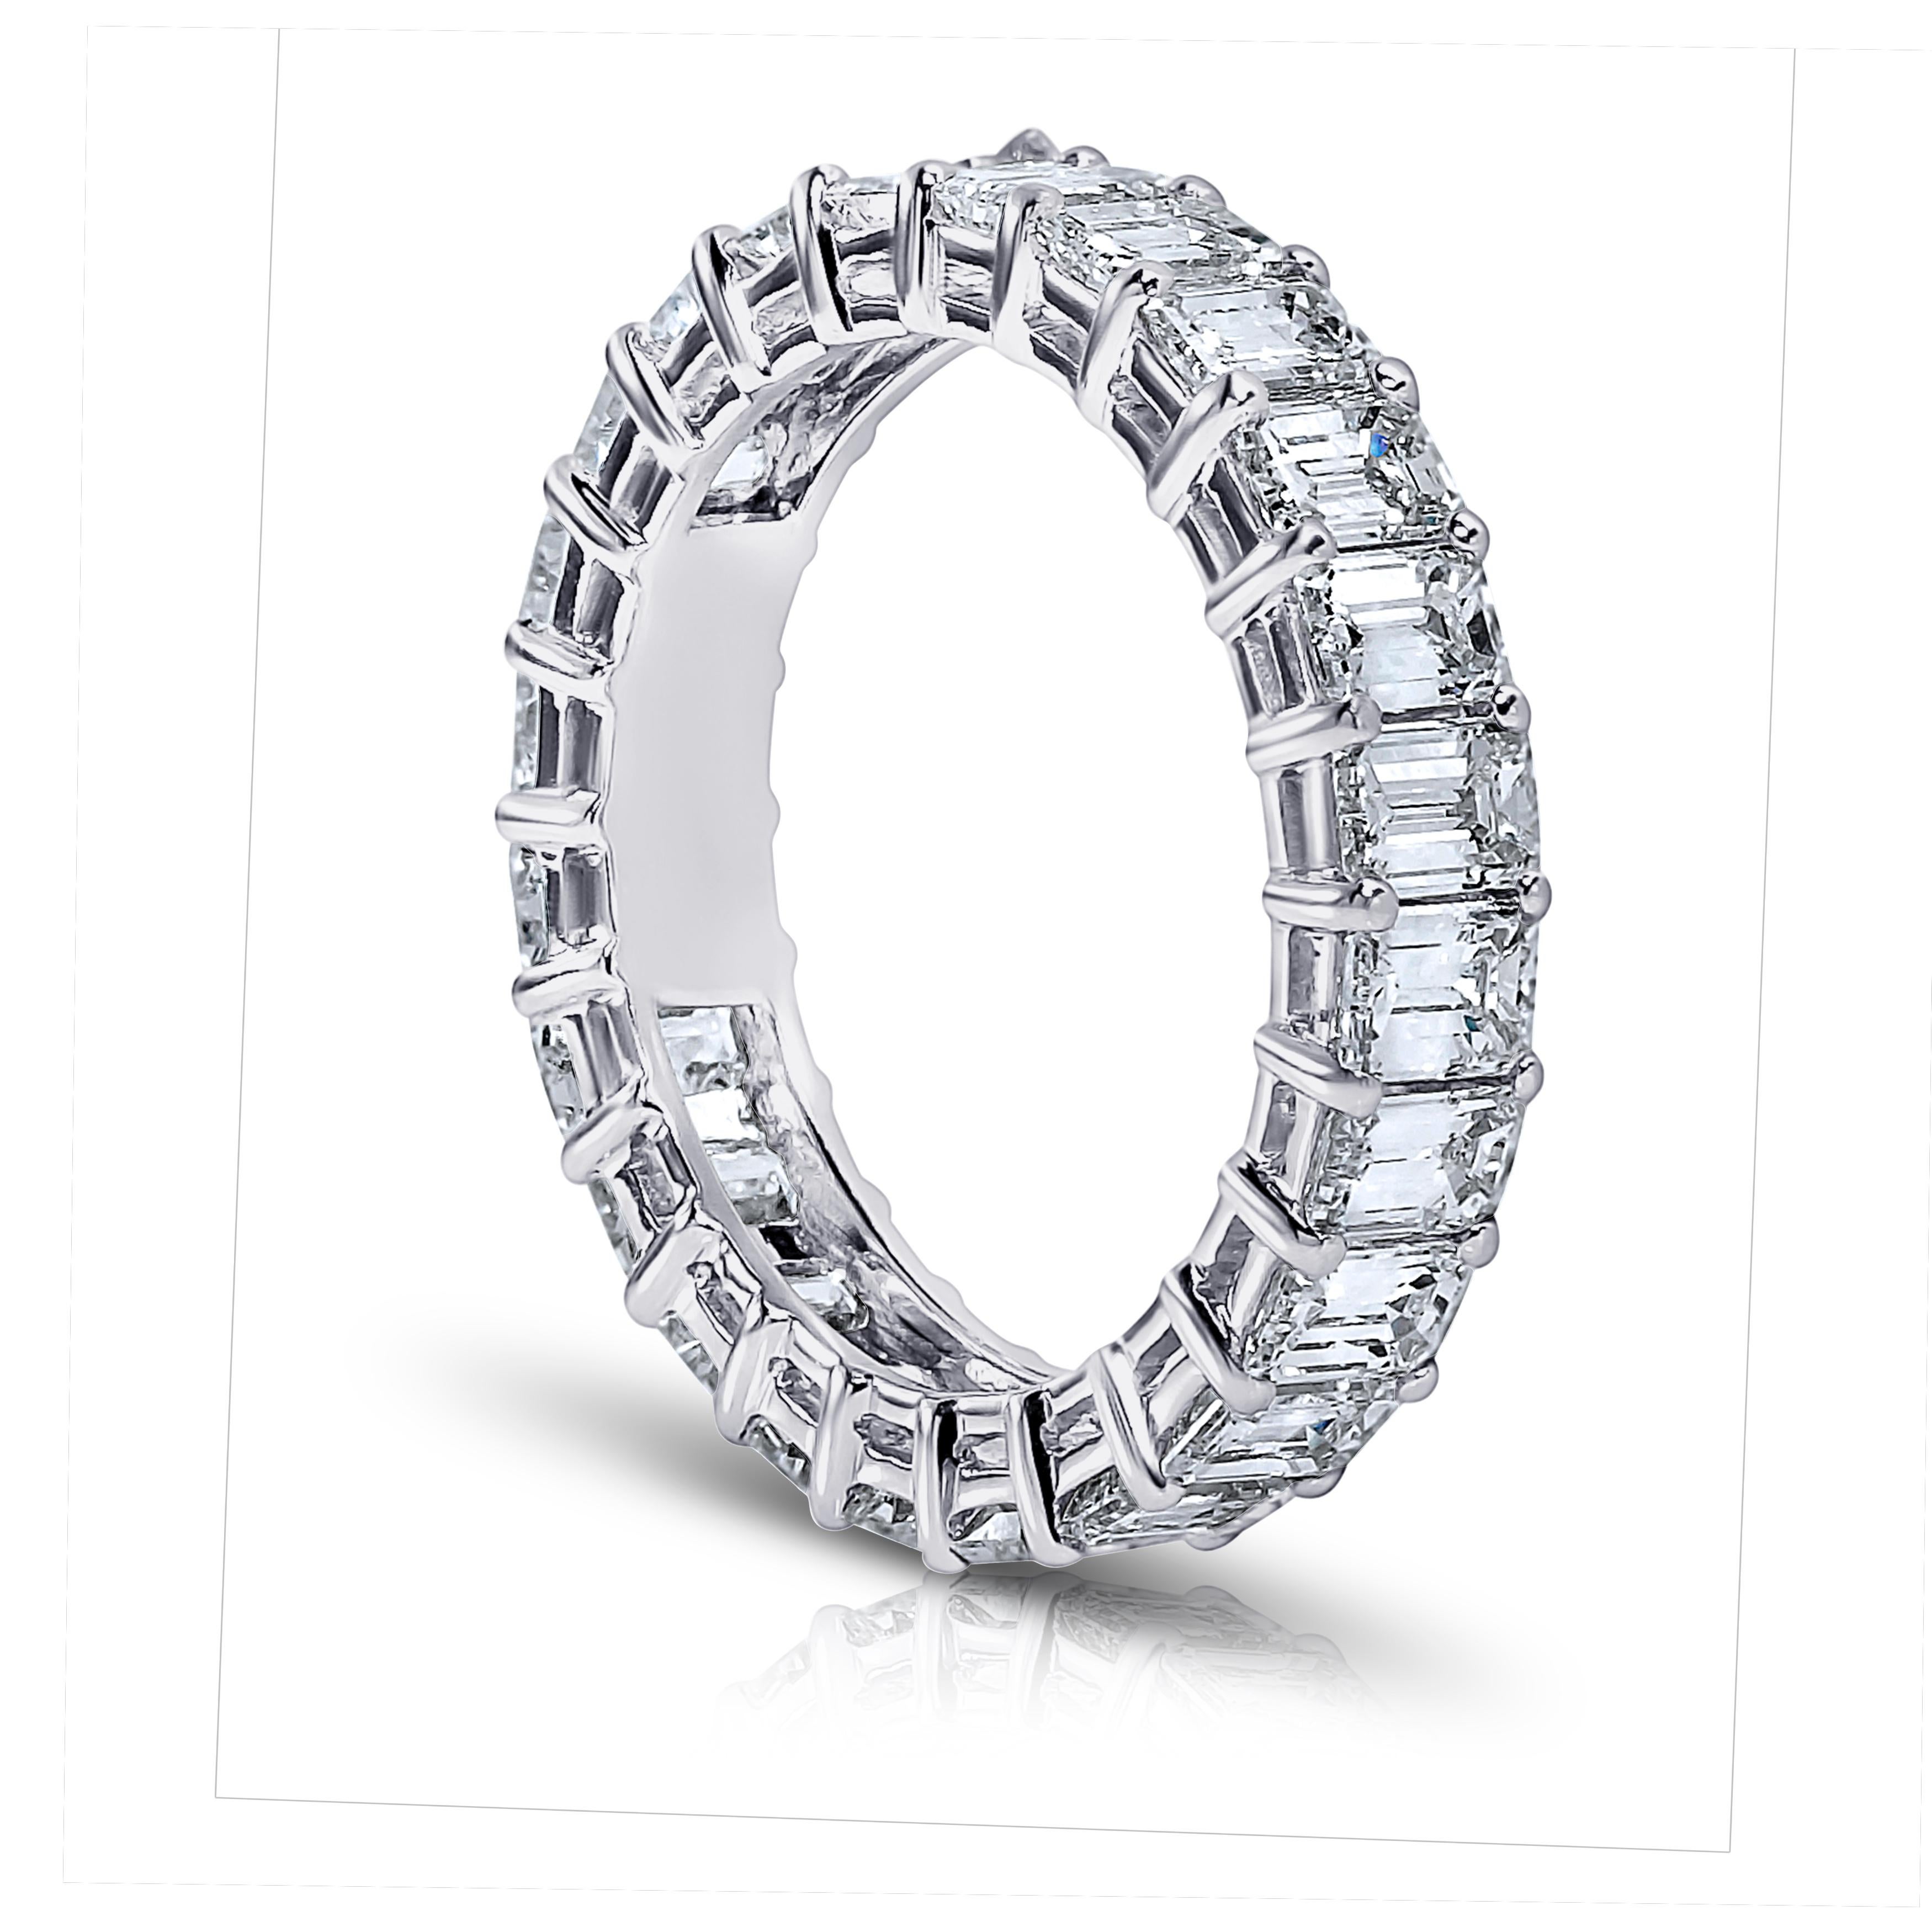 Emerald Cut diamond ring platinum eternity band shared prong style with a gallery.
23 perfectly matched diamonds weighing a minimum of 3.70cts. 
Ranging from G-H in color . VVS1-VS2 in clarity .Finger size 5. 
European Size 49. British Size J 1/2 .